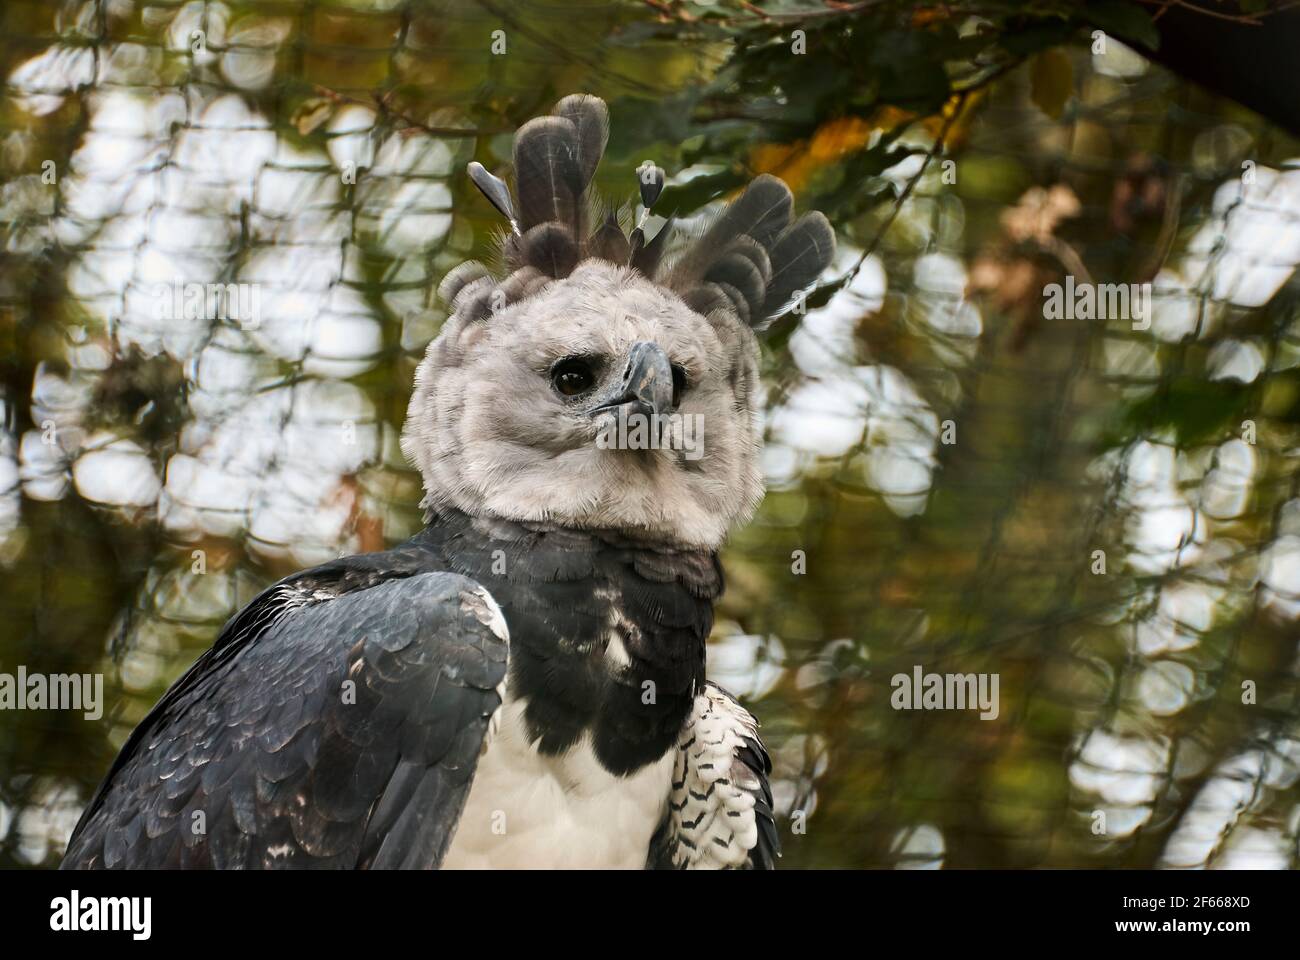 The harpy eagle, Harpia harpyja is also called the American harpy eagle is  among the largest species of eagles in the world. It can be found in the up  Stock Photo 